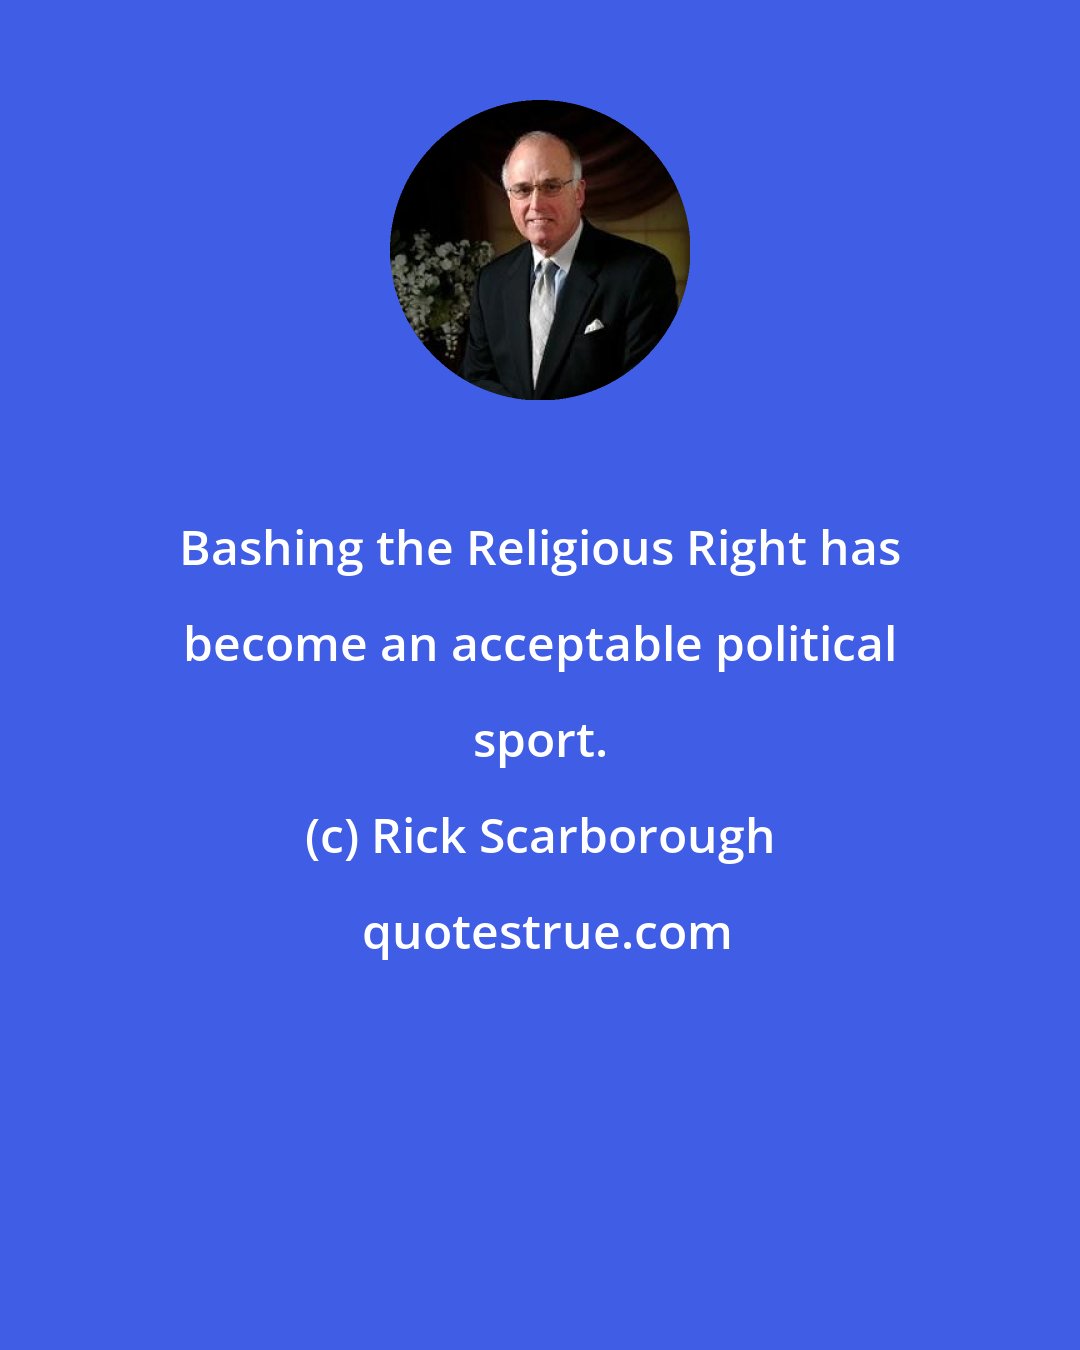 Rick Scarborough: Bashing the Religious Right has become an acceptable political sport.